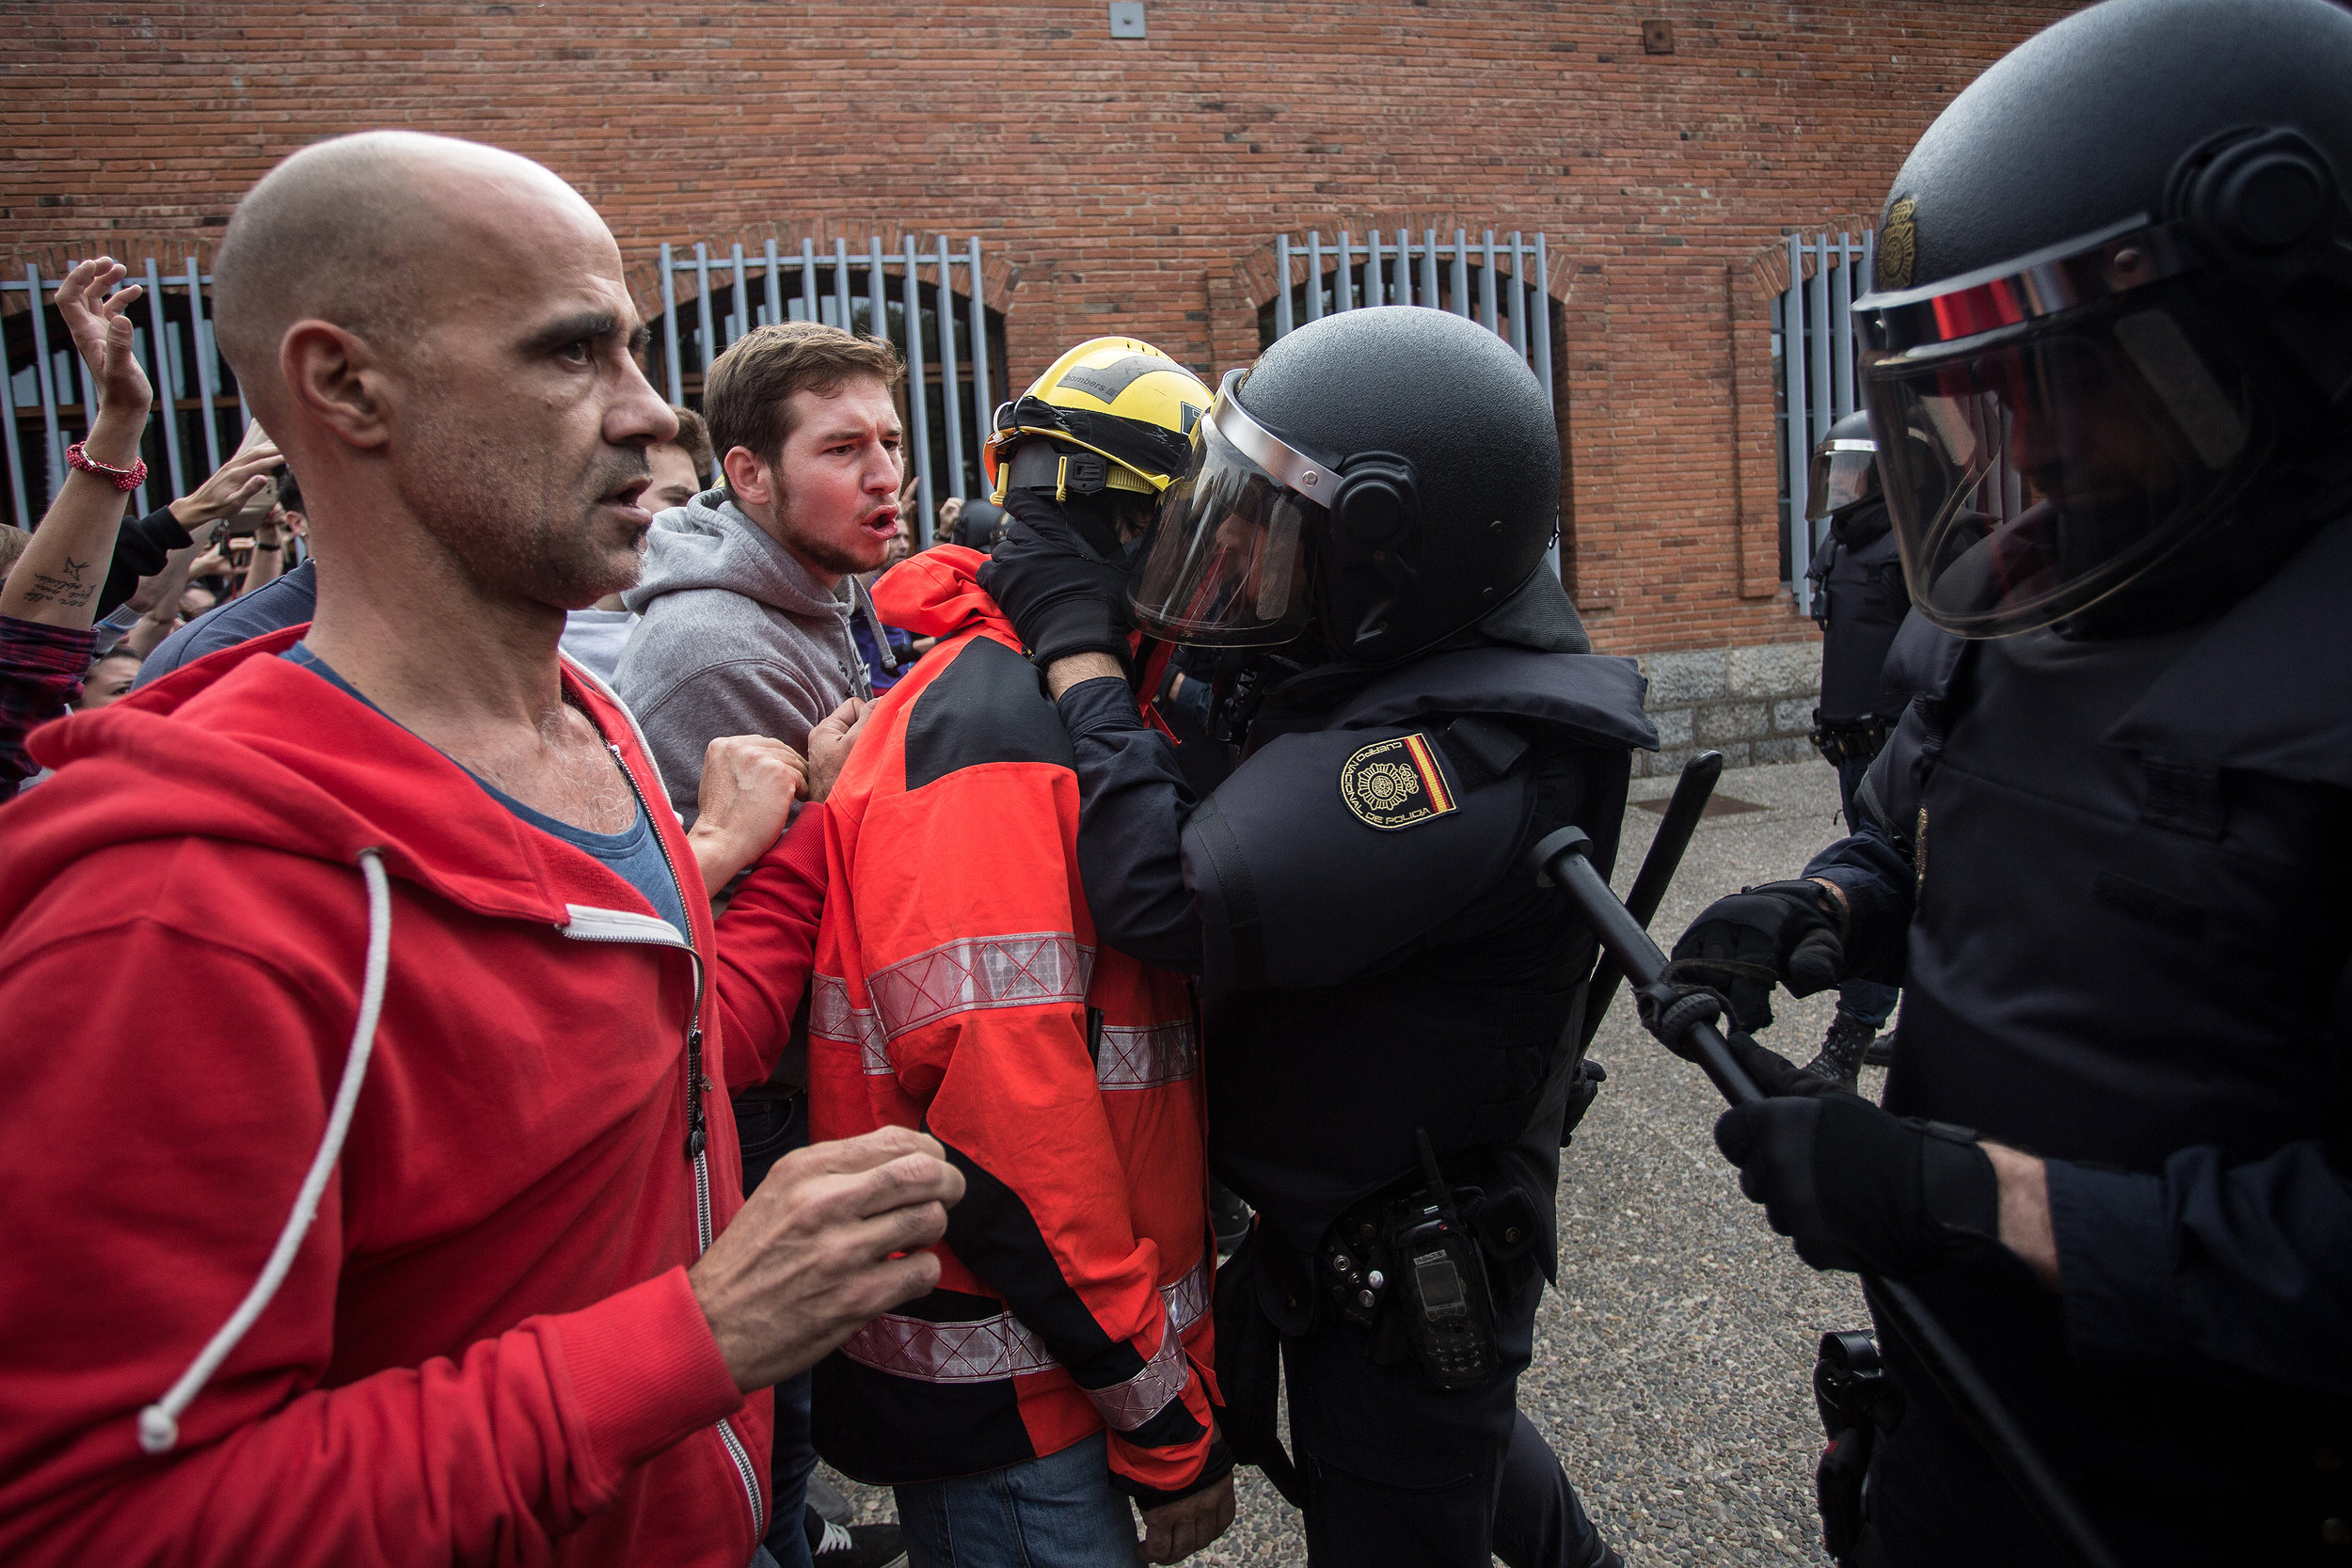 Voters facing police officers on October 1 in Catalonia (by Carles Palacio)